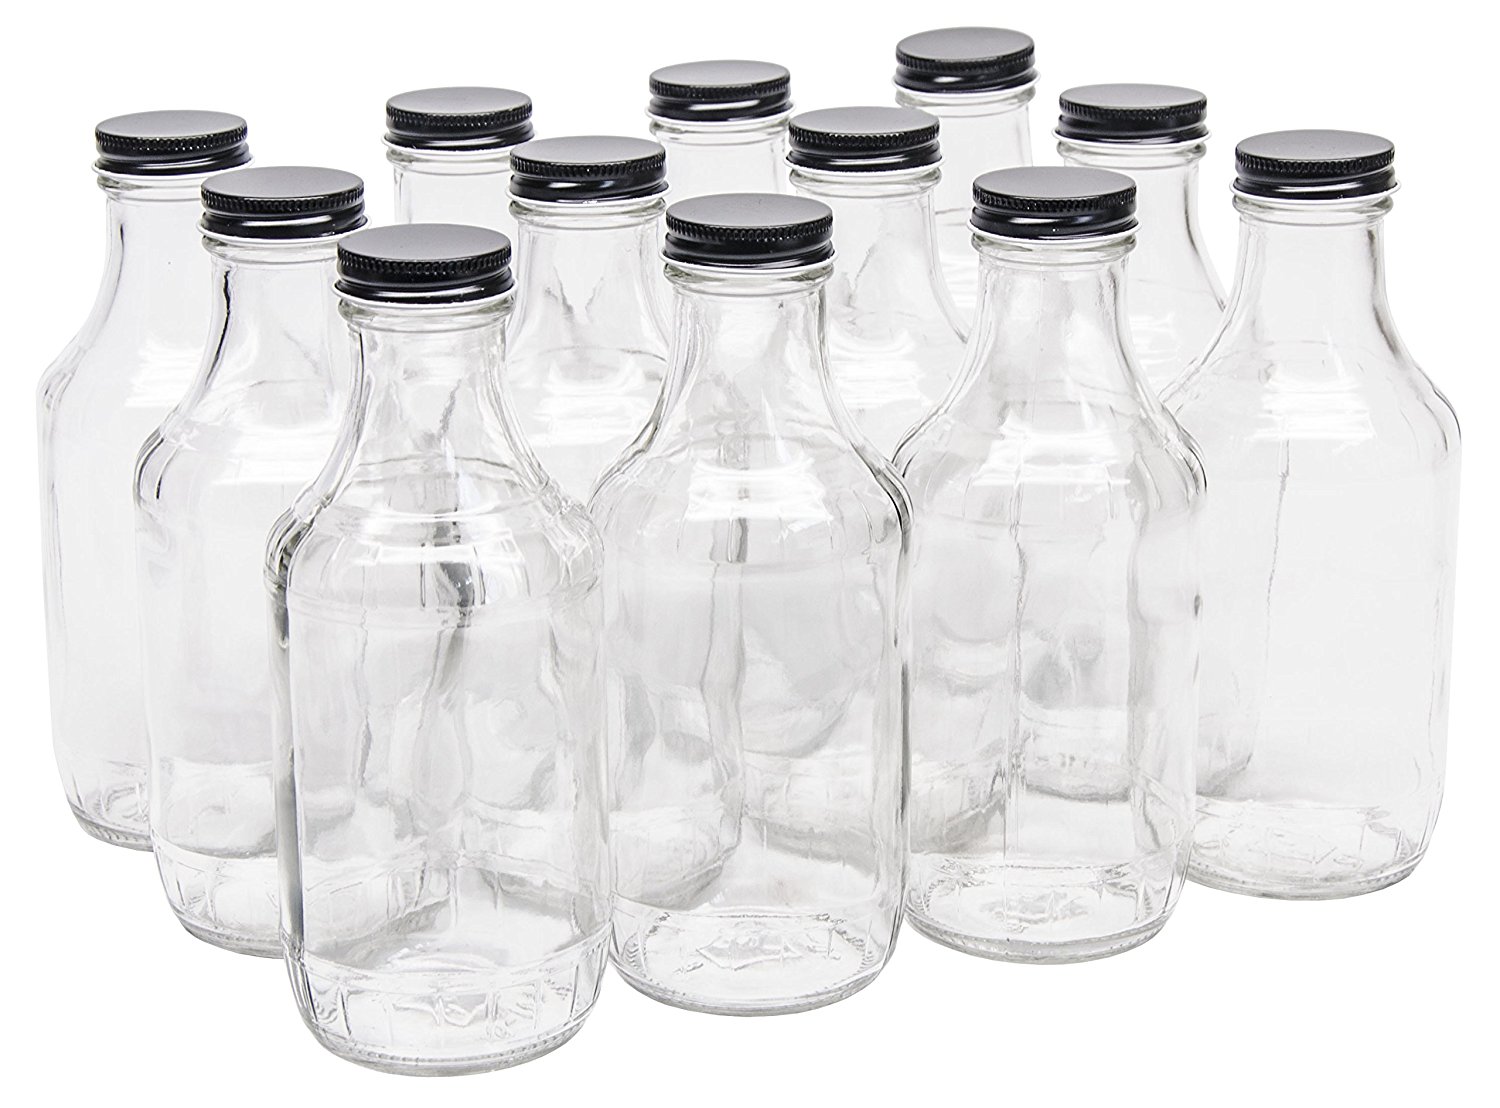 North Mountain Supply 16 Ounce Glass Sauce Bottle - with 38mm Black Metal Lids - Case of 12